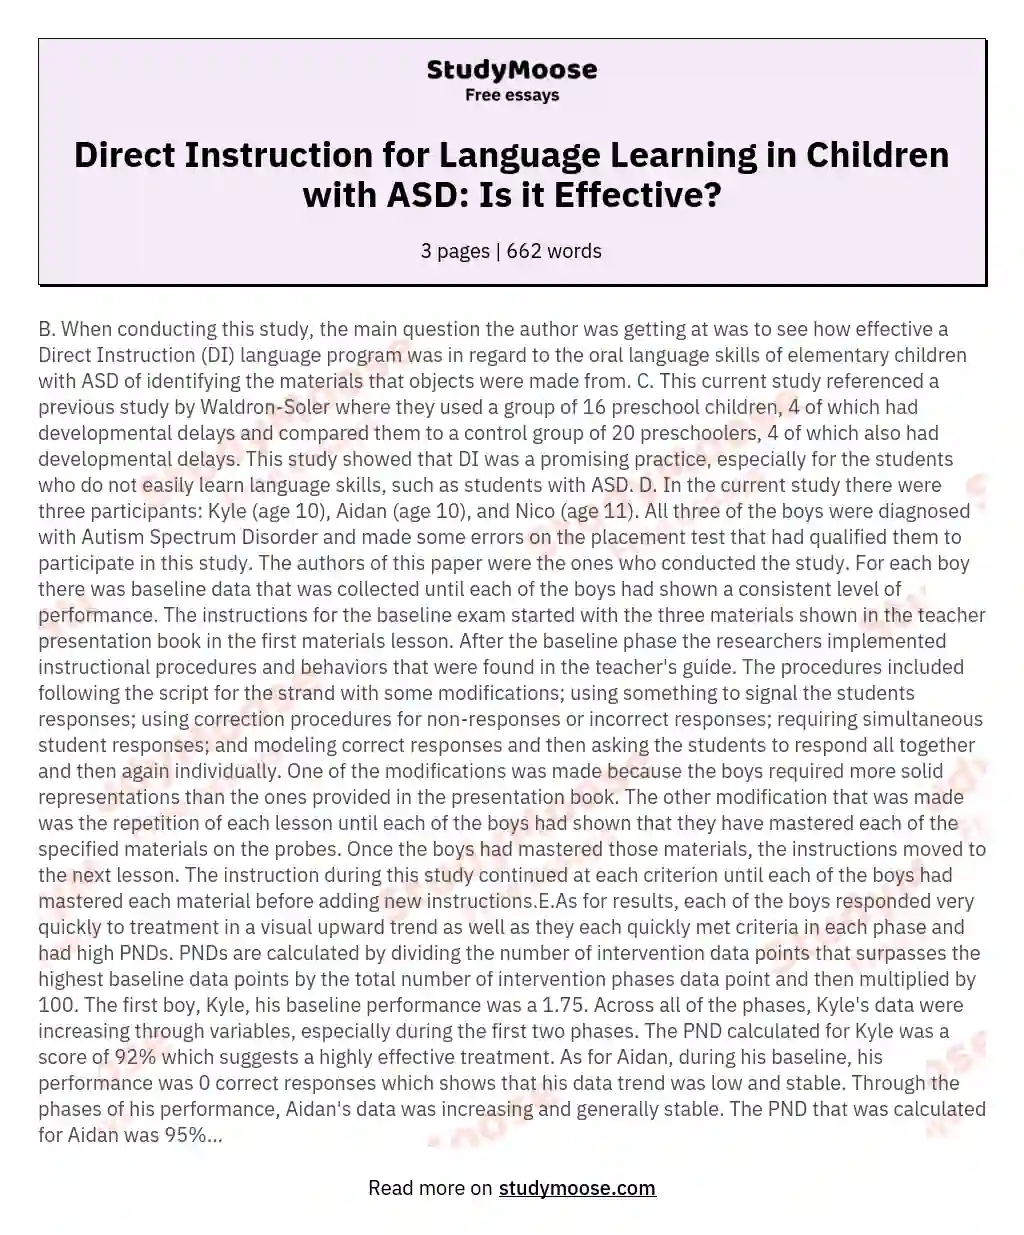 Direct Instruction for Language Learning in Children with ASD: Is it Effective? essay